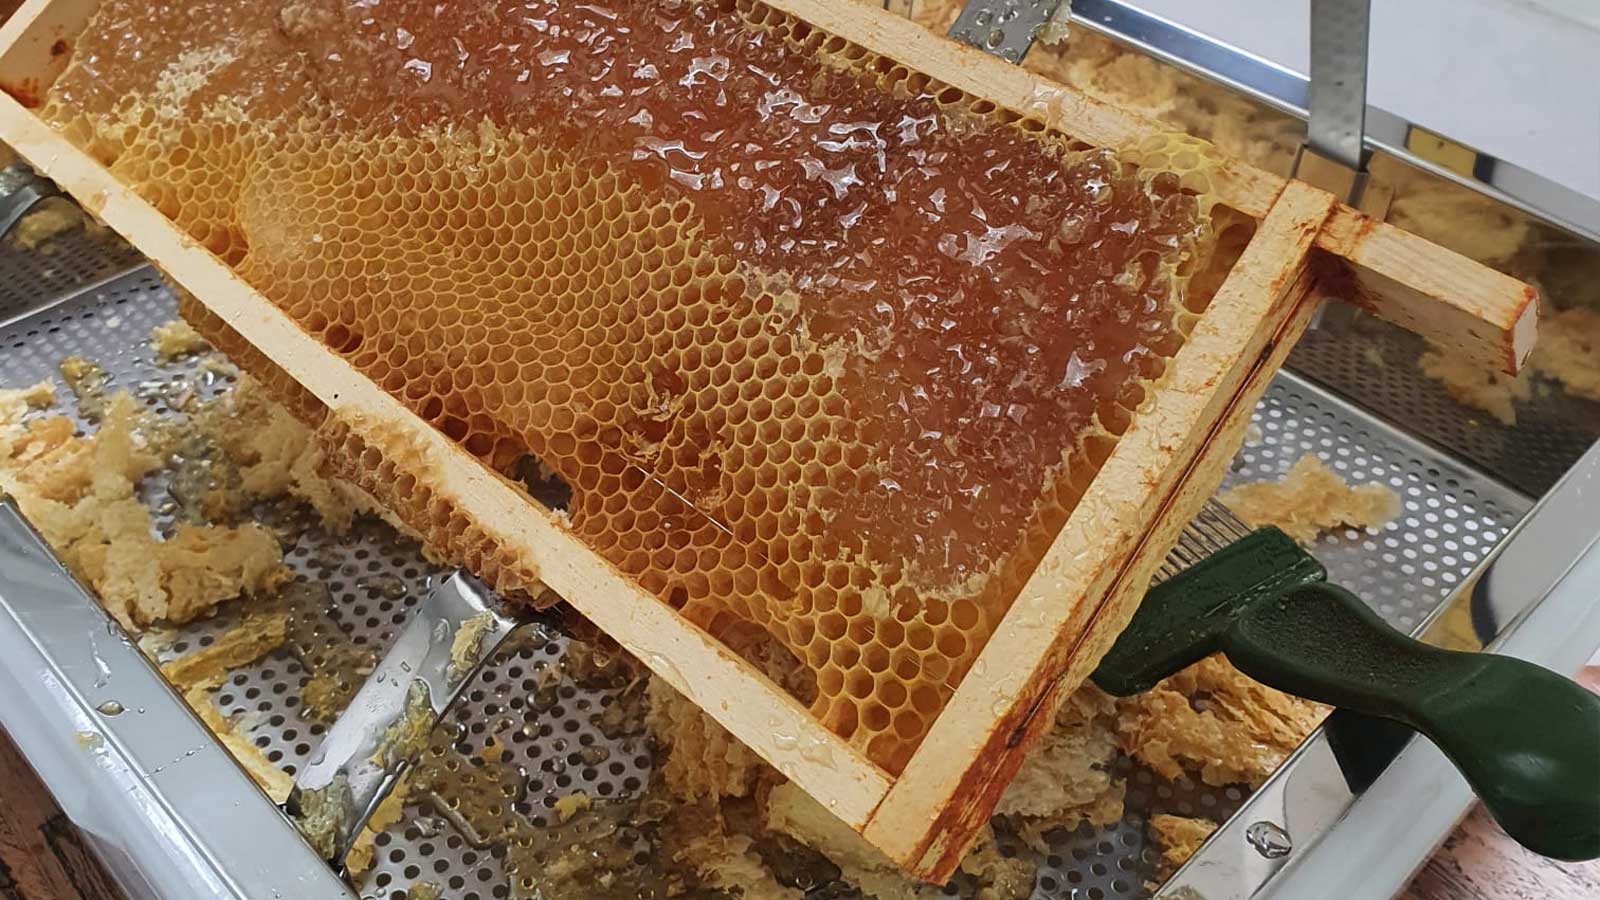 The honey yield from the Milgro hive